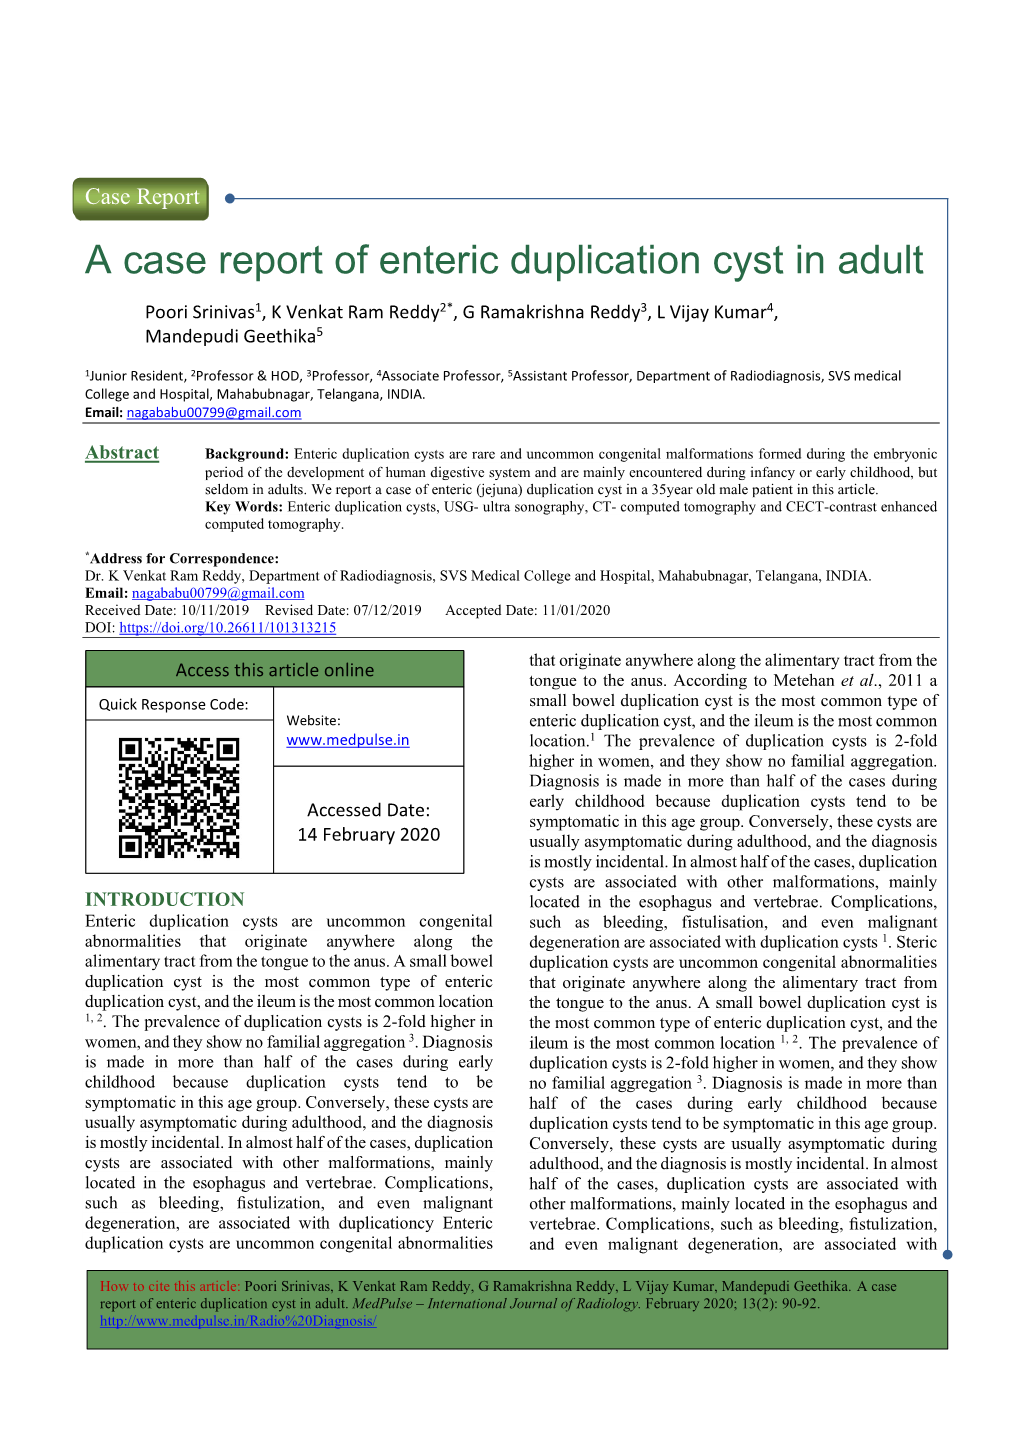 A Case Report of Enteric Duplication Cyst in Adult